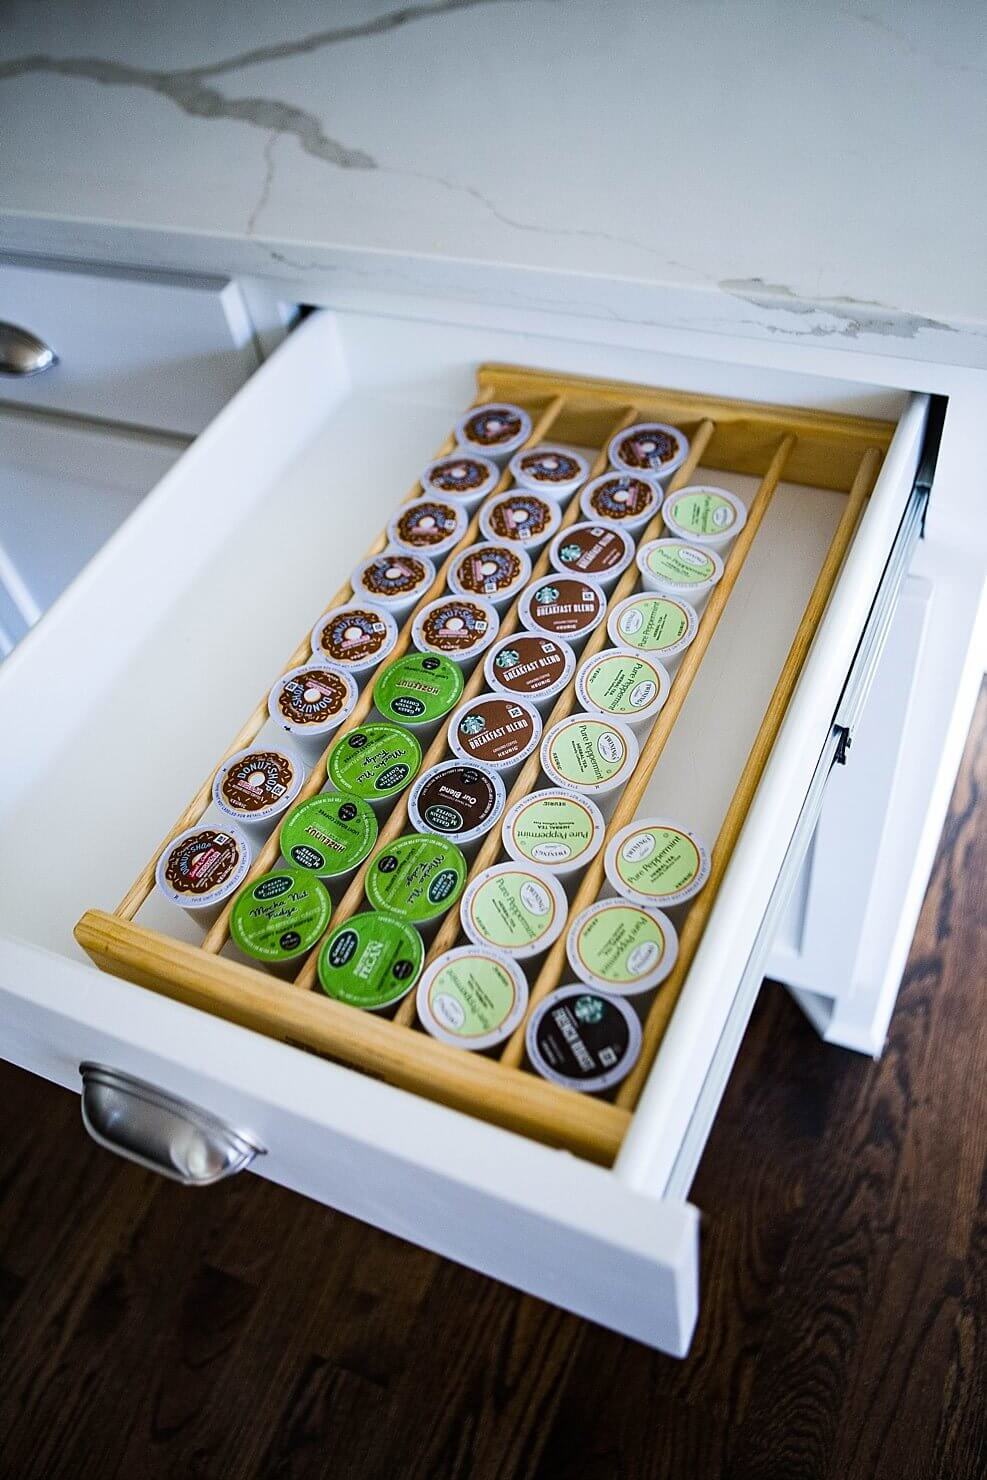 How to organize your kitchen cabinets - coffee drawer, organizing K-cups in drawer with wood insert organizer